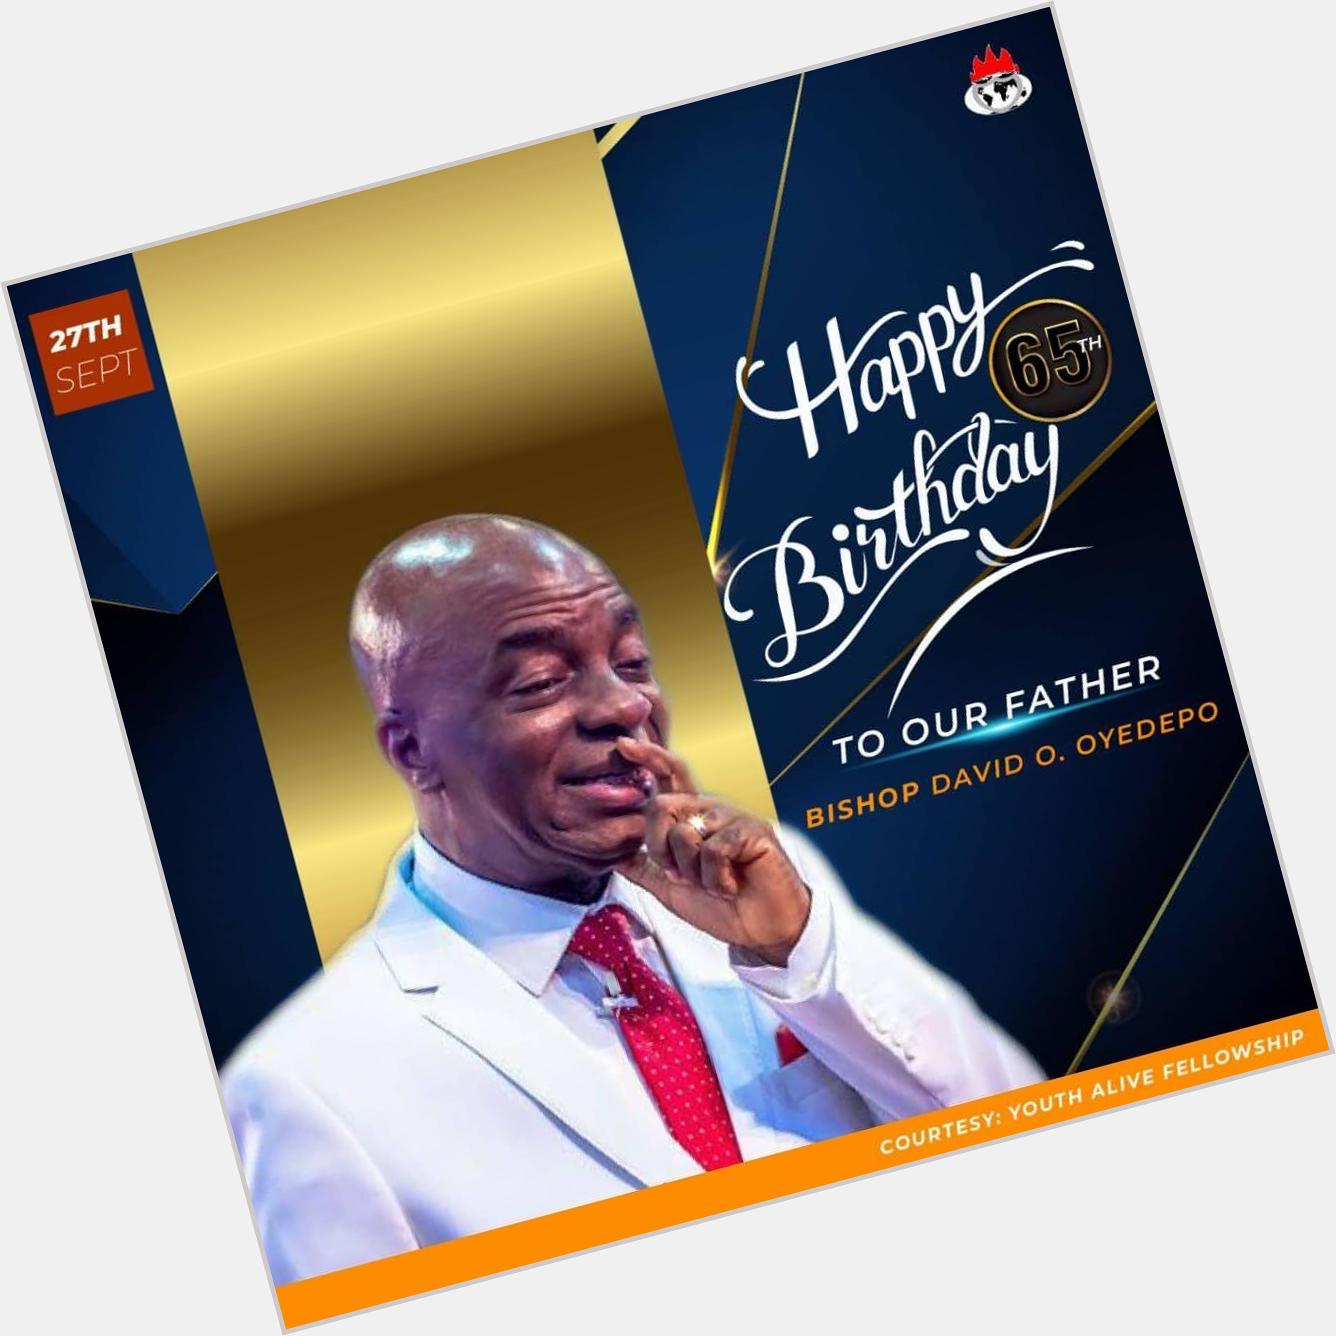 I can proudly say that Bishop David Oyedepo is my daddy.
Happy Birthday great man of faith!
Keep doing exploit. 